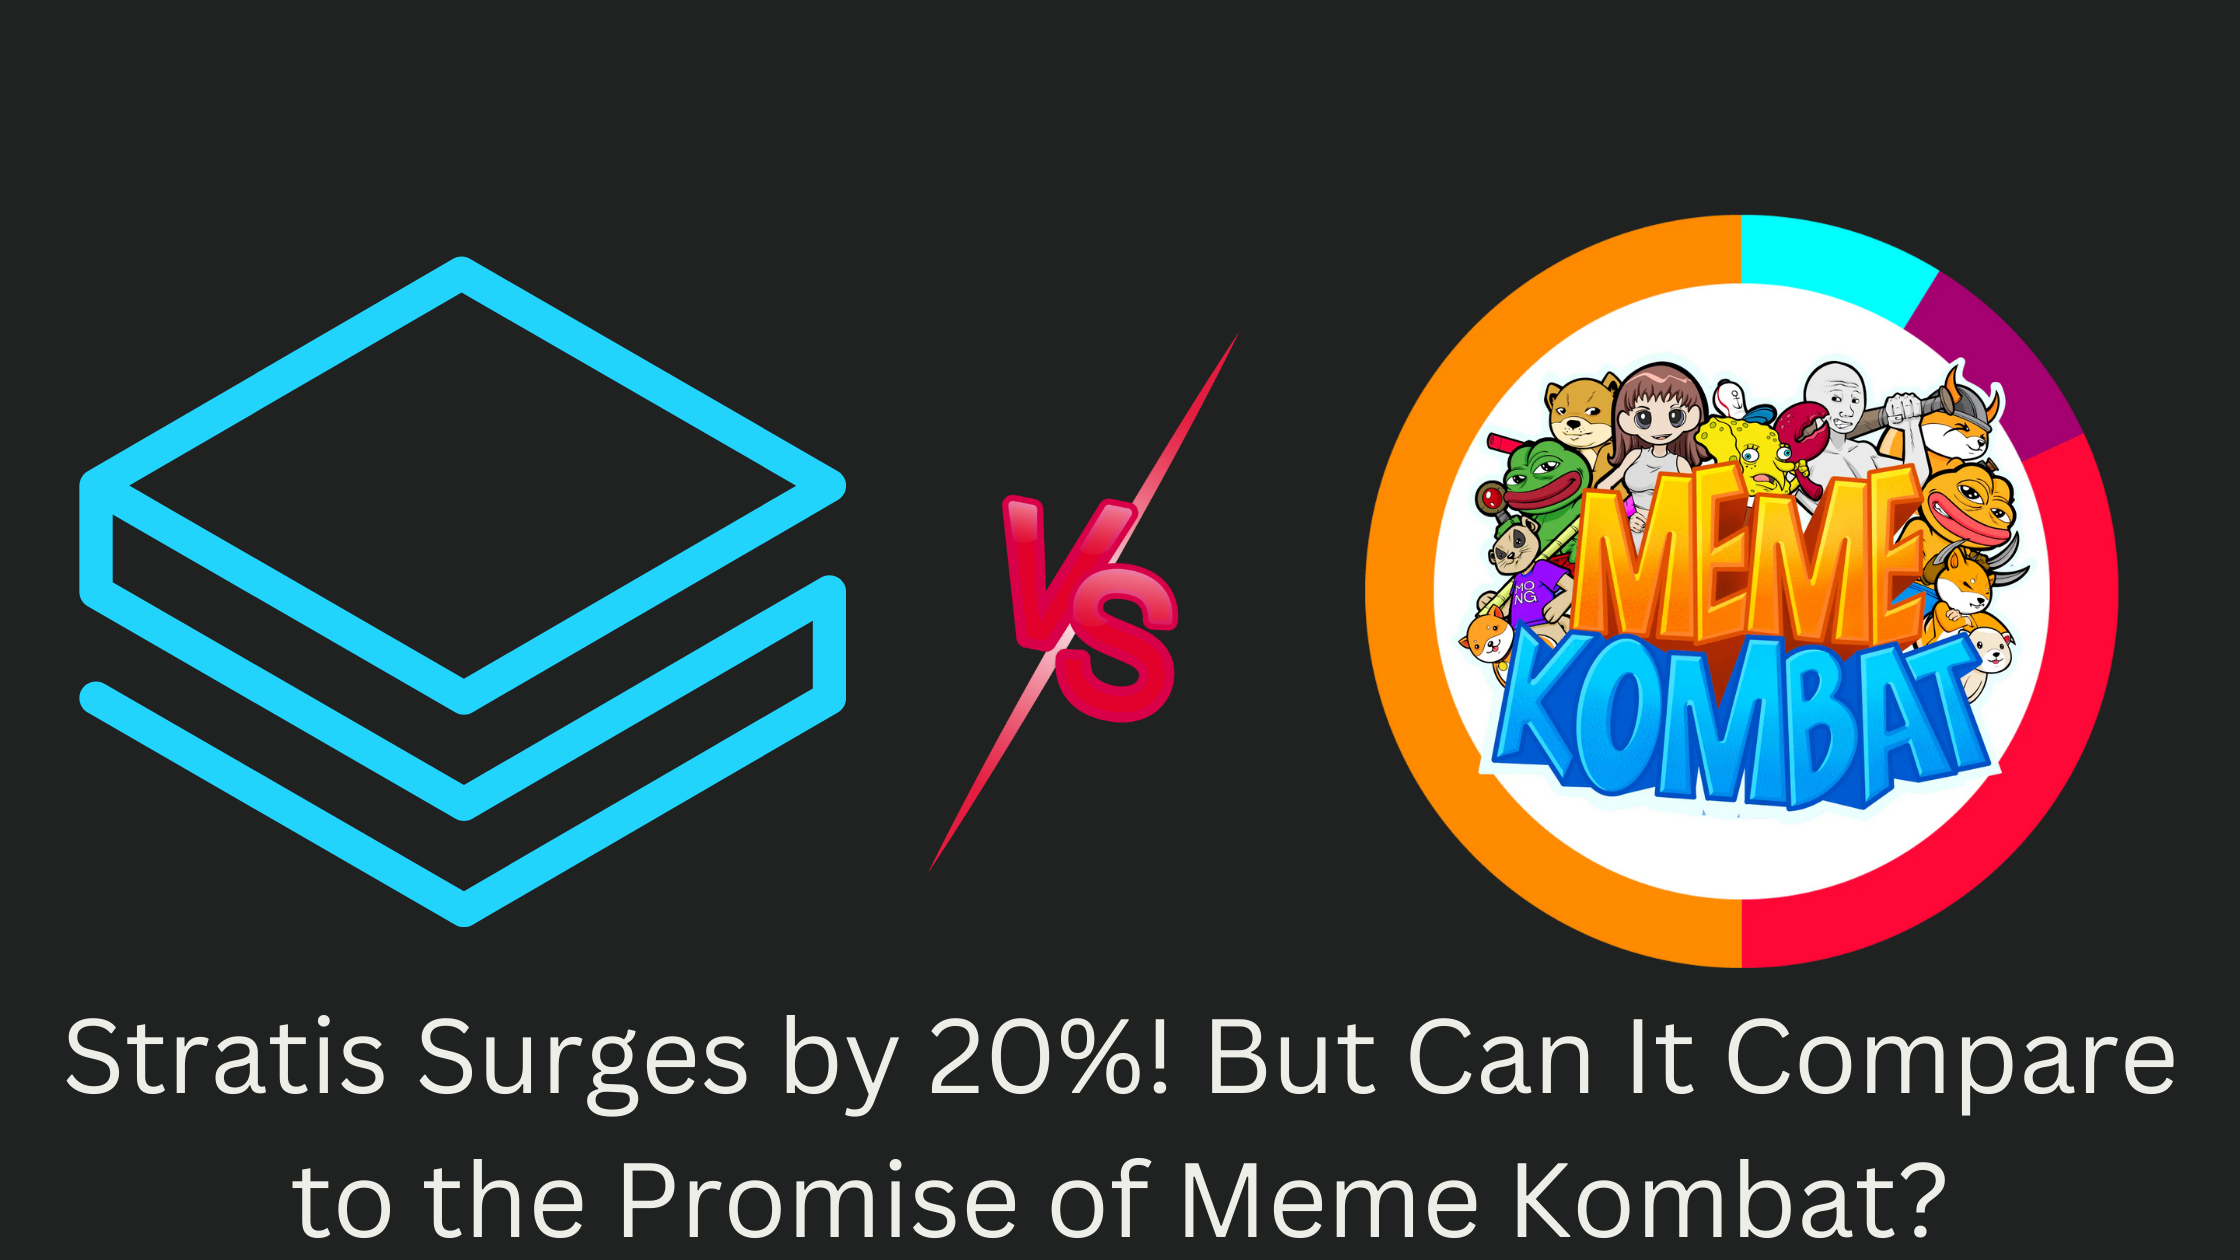 Stratis Surges by 20%! But Can It Compare to the Promise of Meme Kombat?